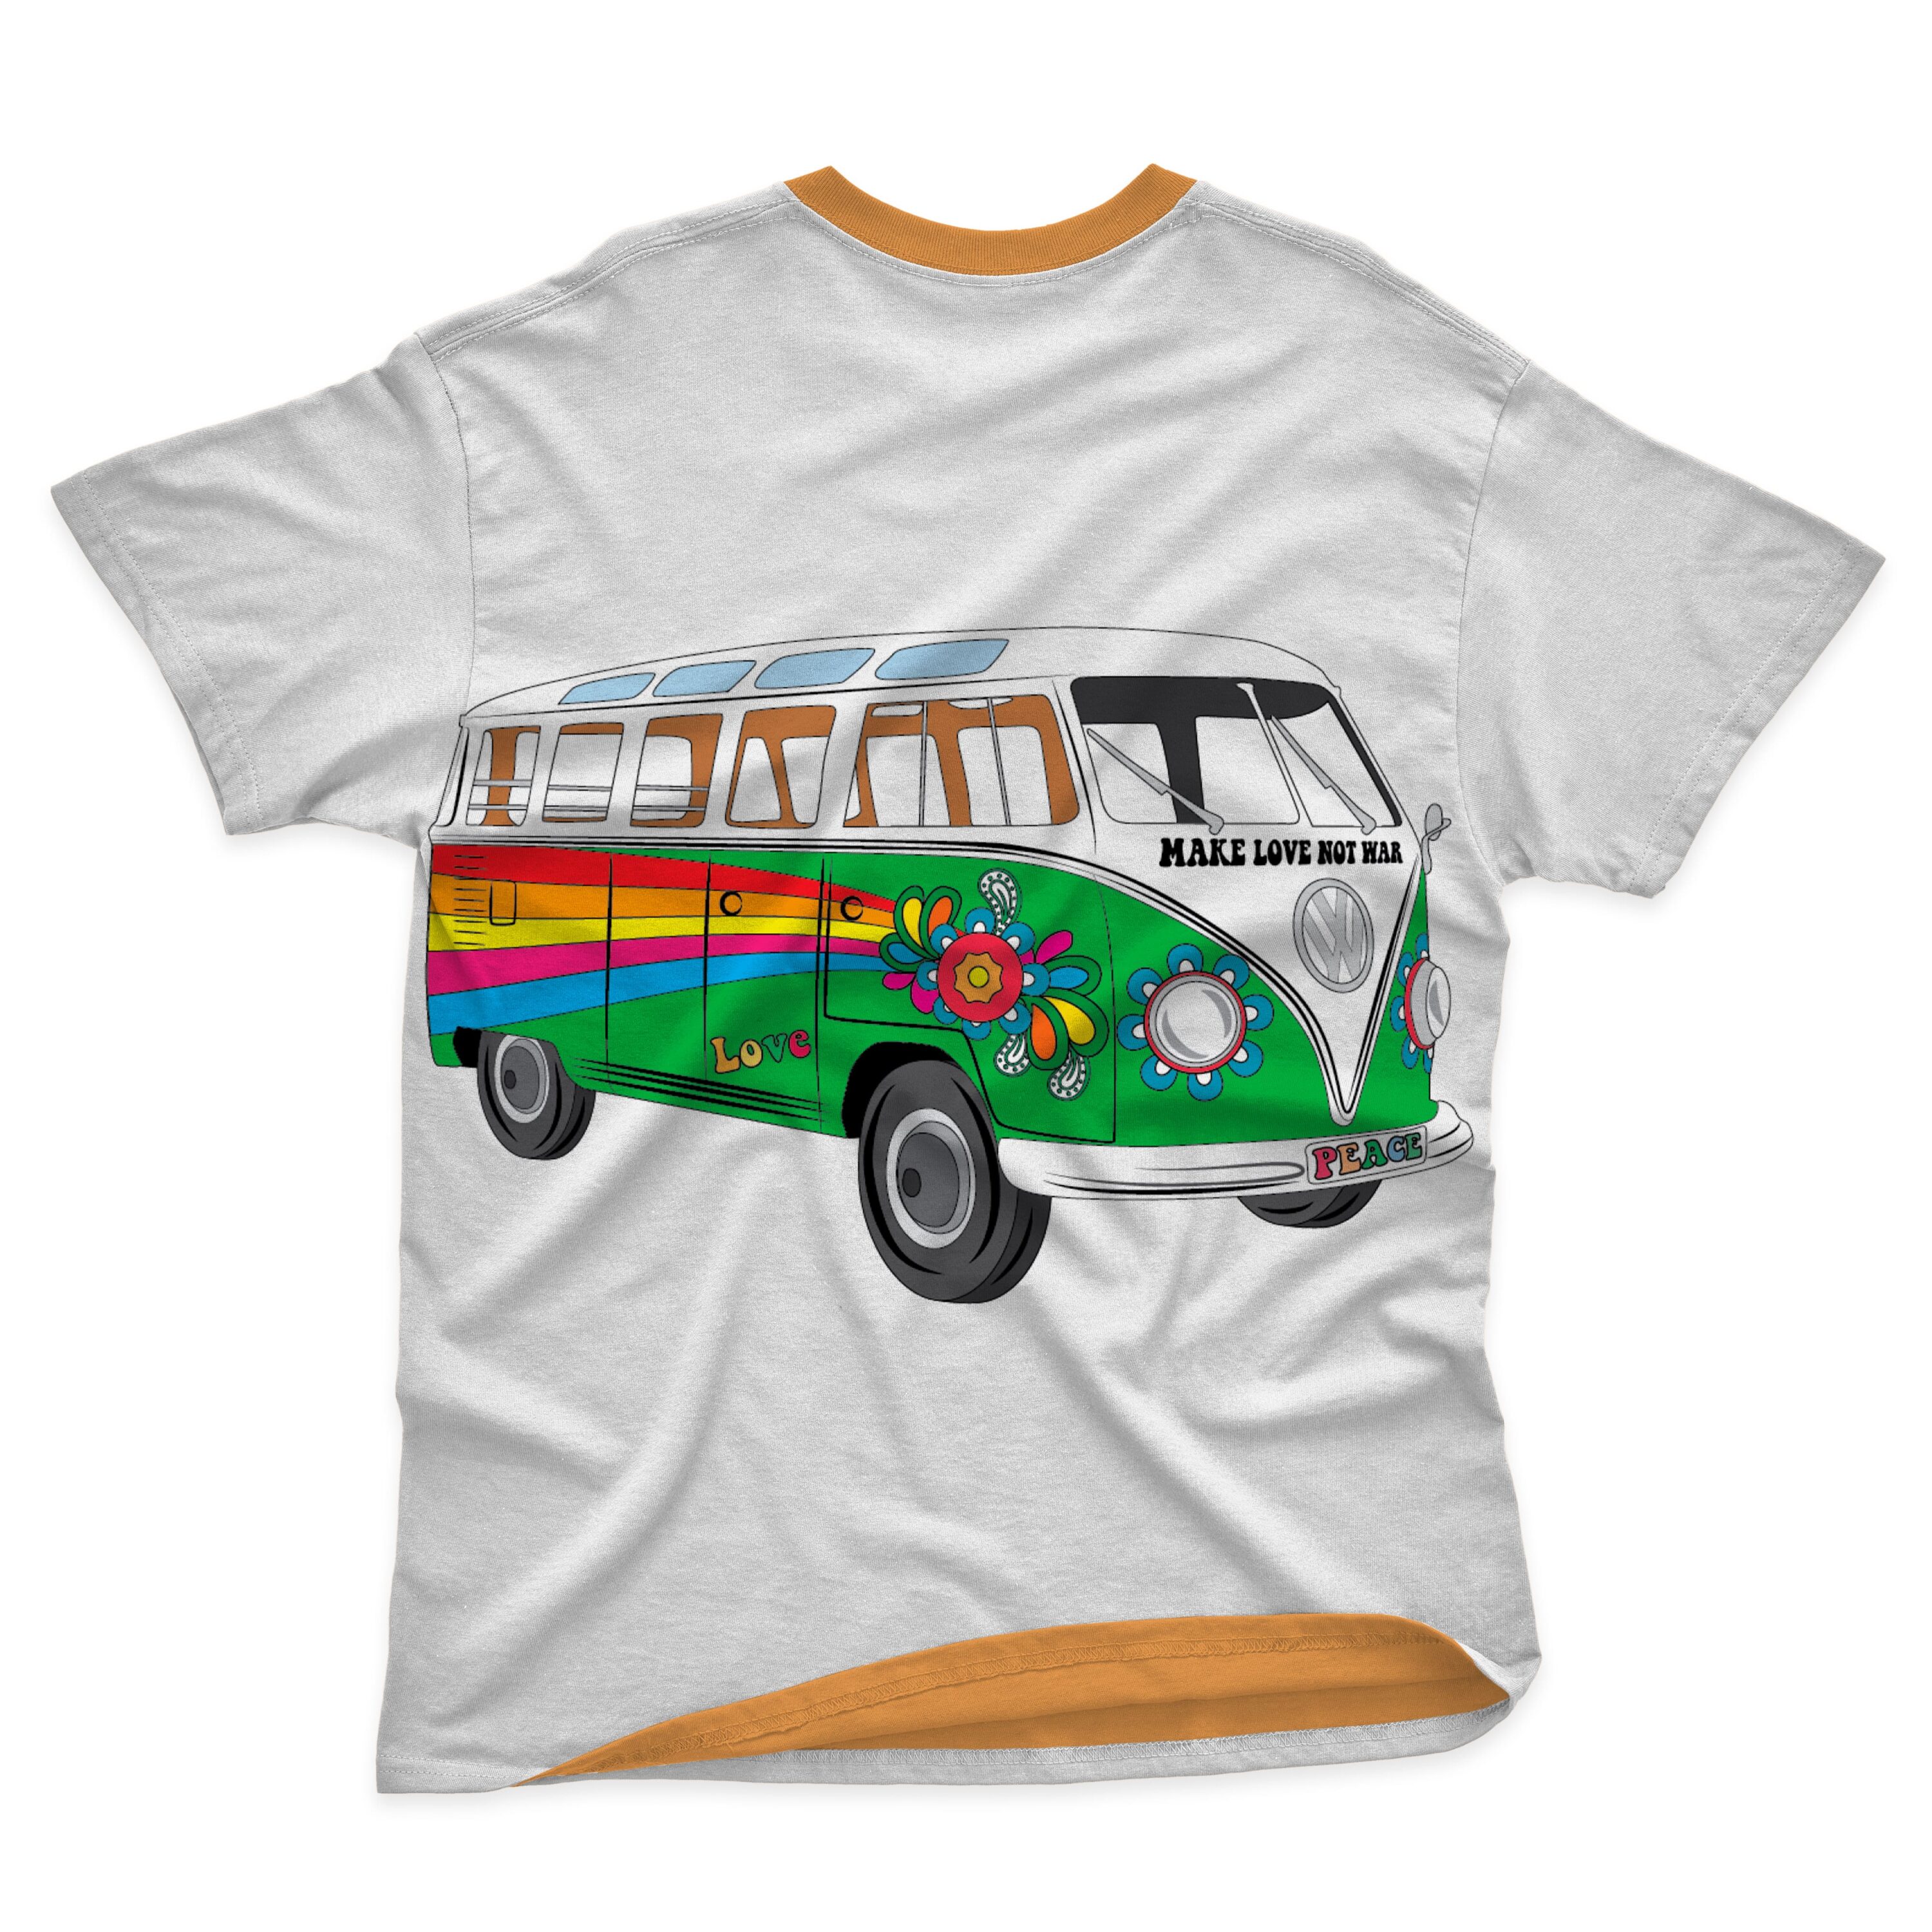 Amazingly designed t-shirt with peaceful hippie vibes.